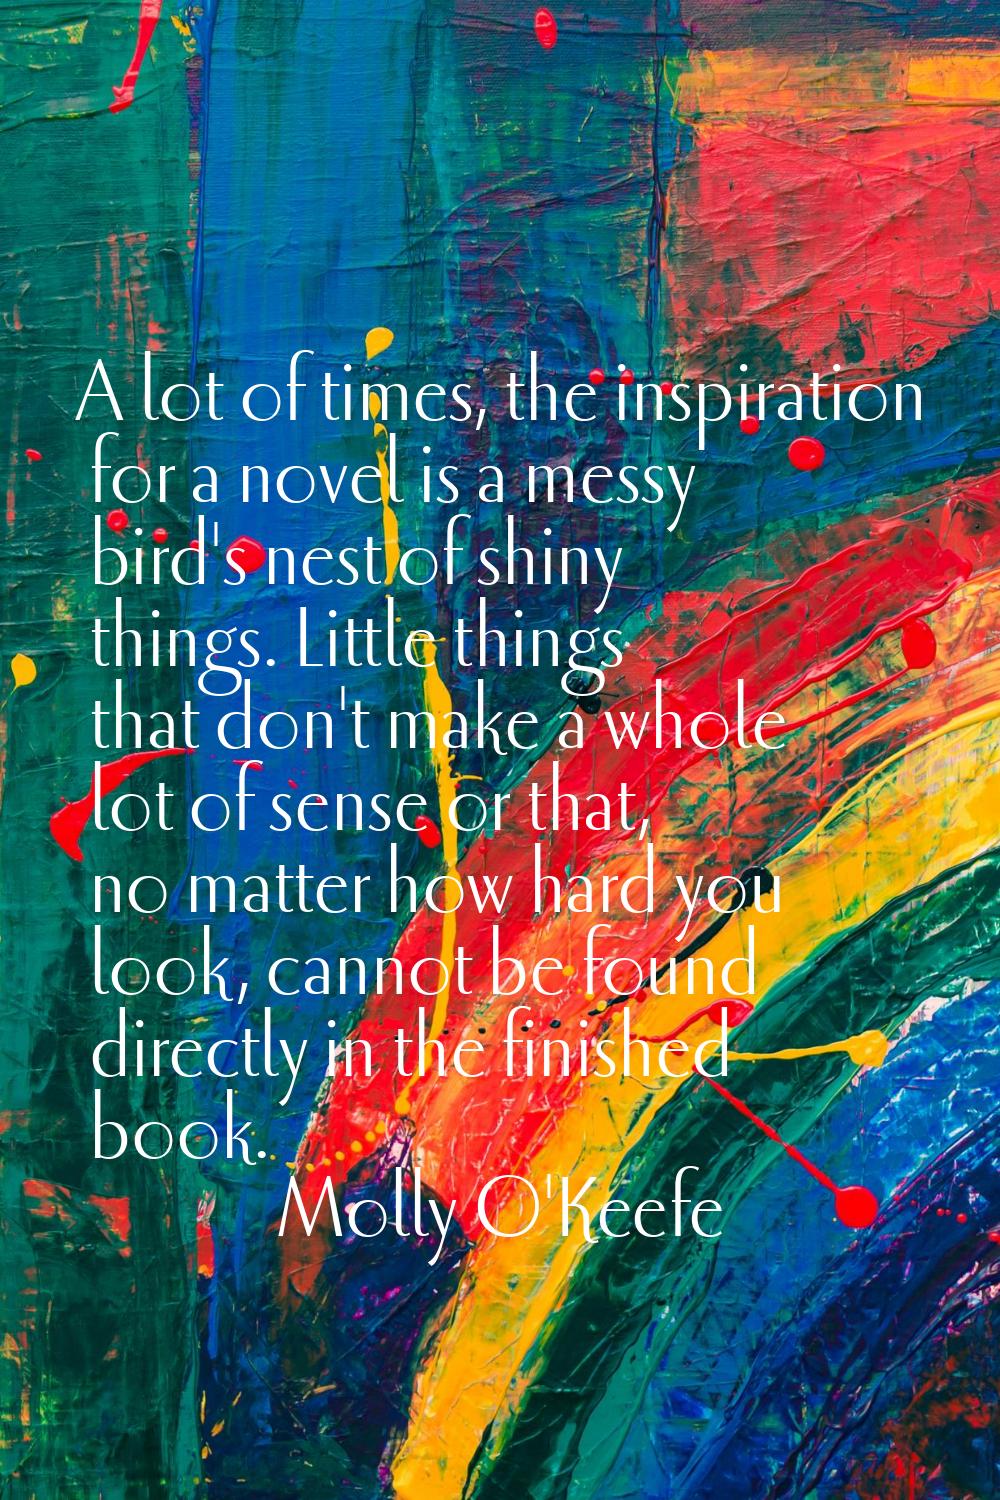 A lot of times, the inspiration for a novel is a messy bird's nest of shiny things. Little things t